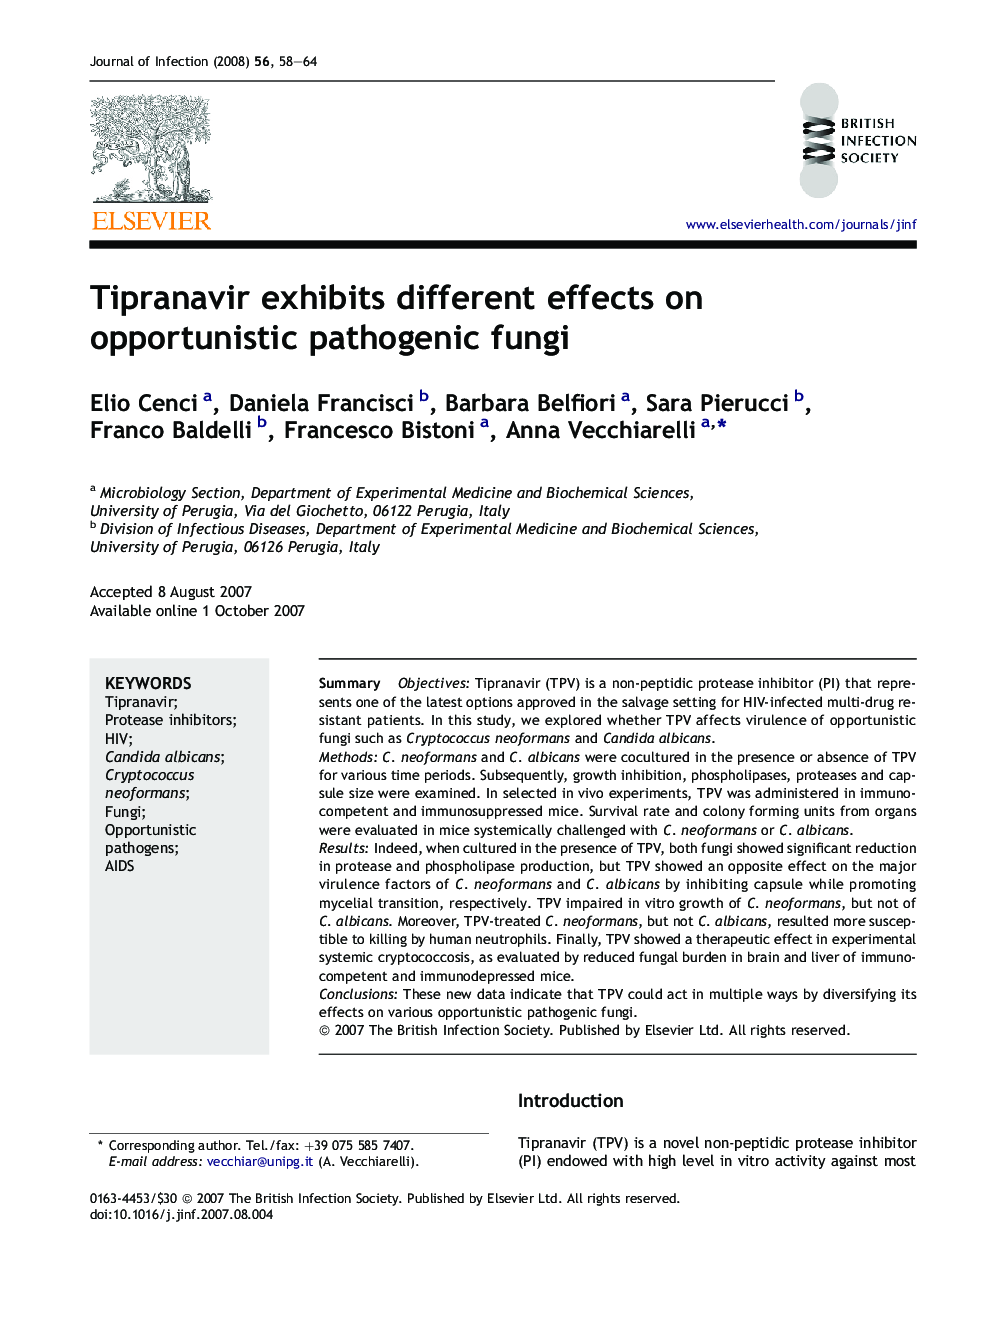 Tipranavir exhibits different effects on opportunistic pathogenic fungi